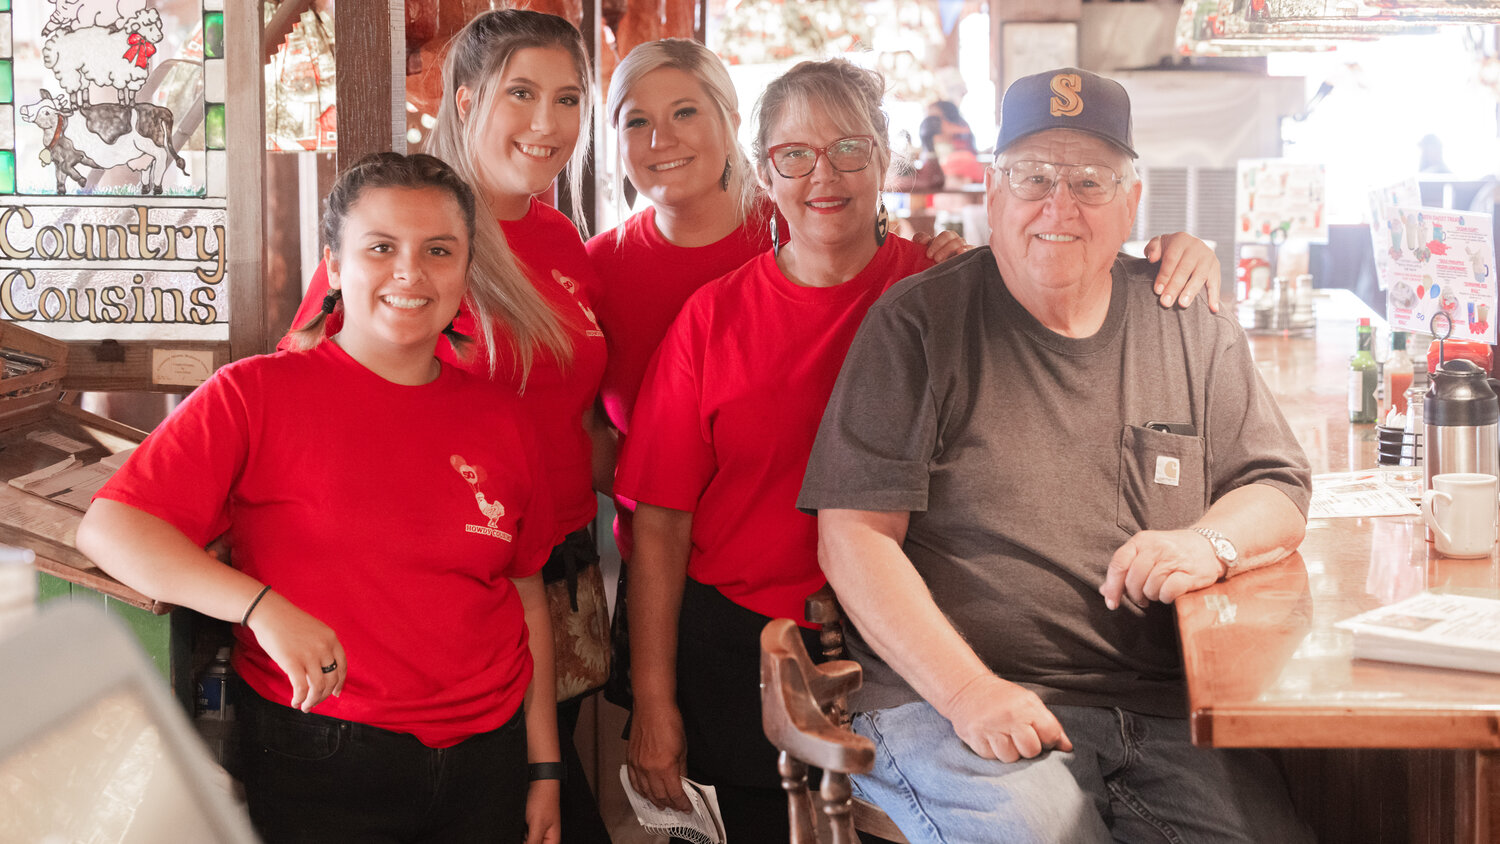 From left, Layla Lloyd and Sierra, Stephanie and Keeley Campbell smile for a photo with Fred Tereski inside Country Cousin in Centralia on Wednesday, Aug. 23. Tereski is a “bread and butter” regular at the establishment.